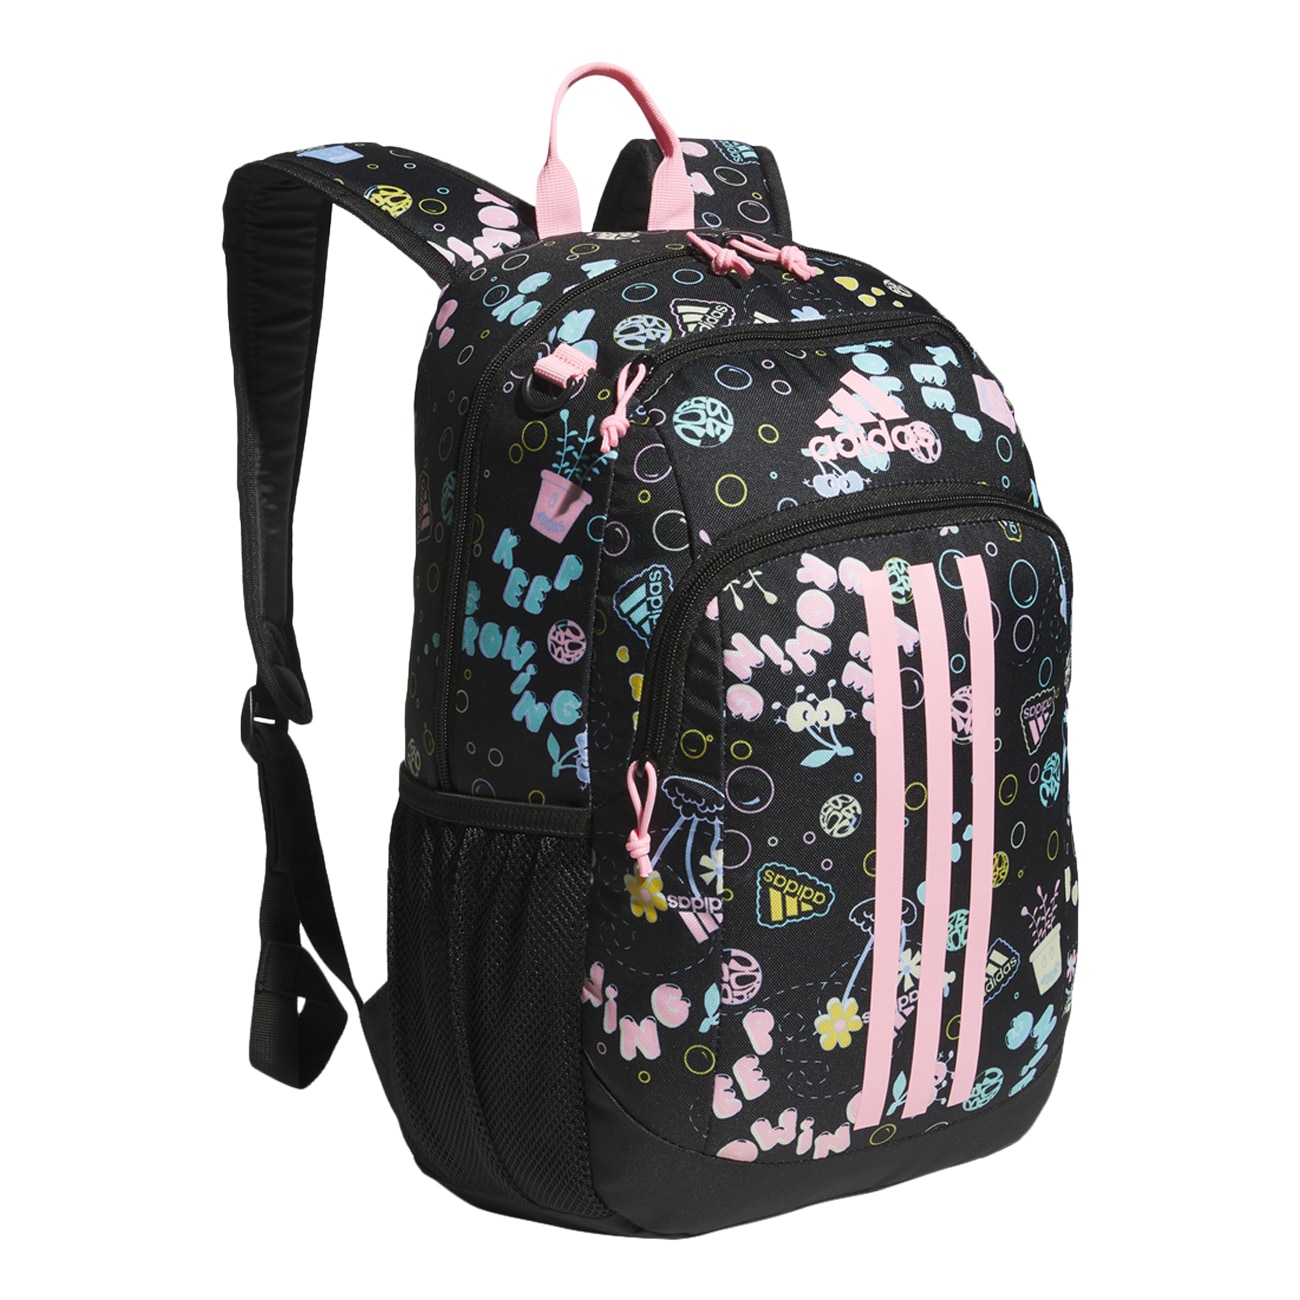 Kids' Young Back-To-School Creator Backpack